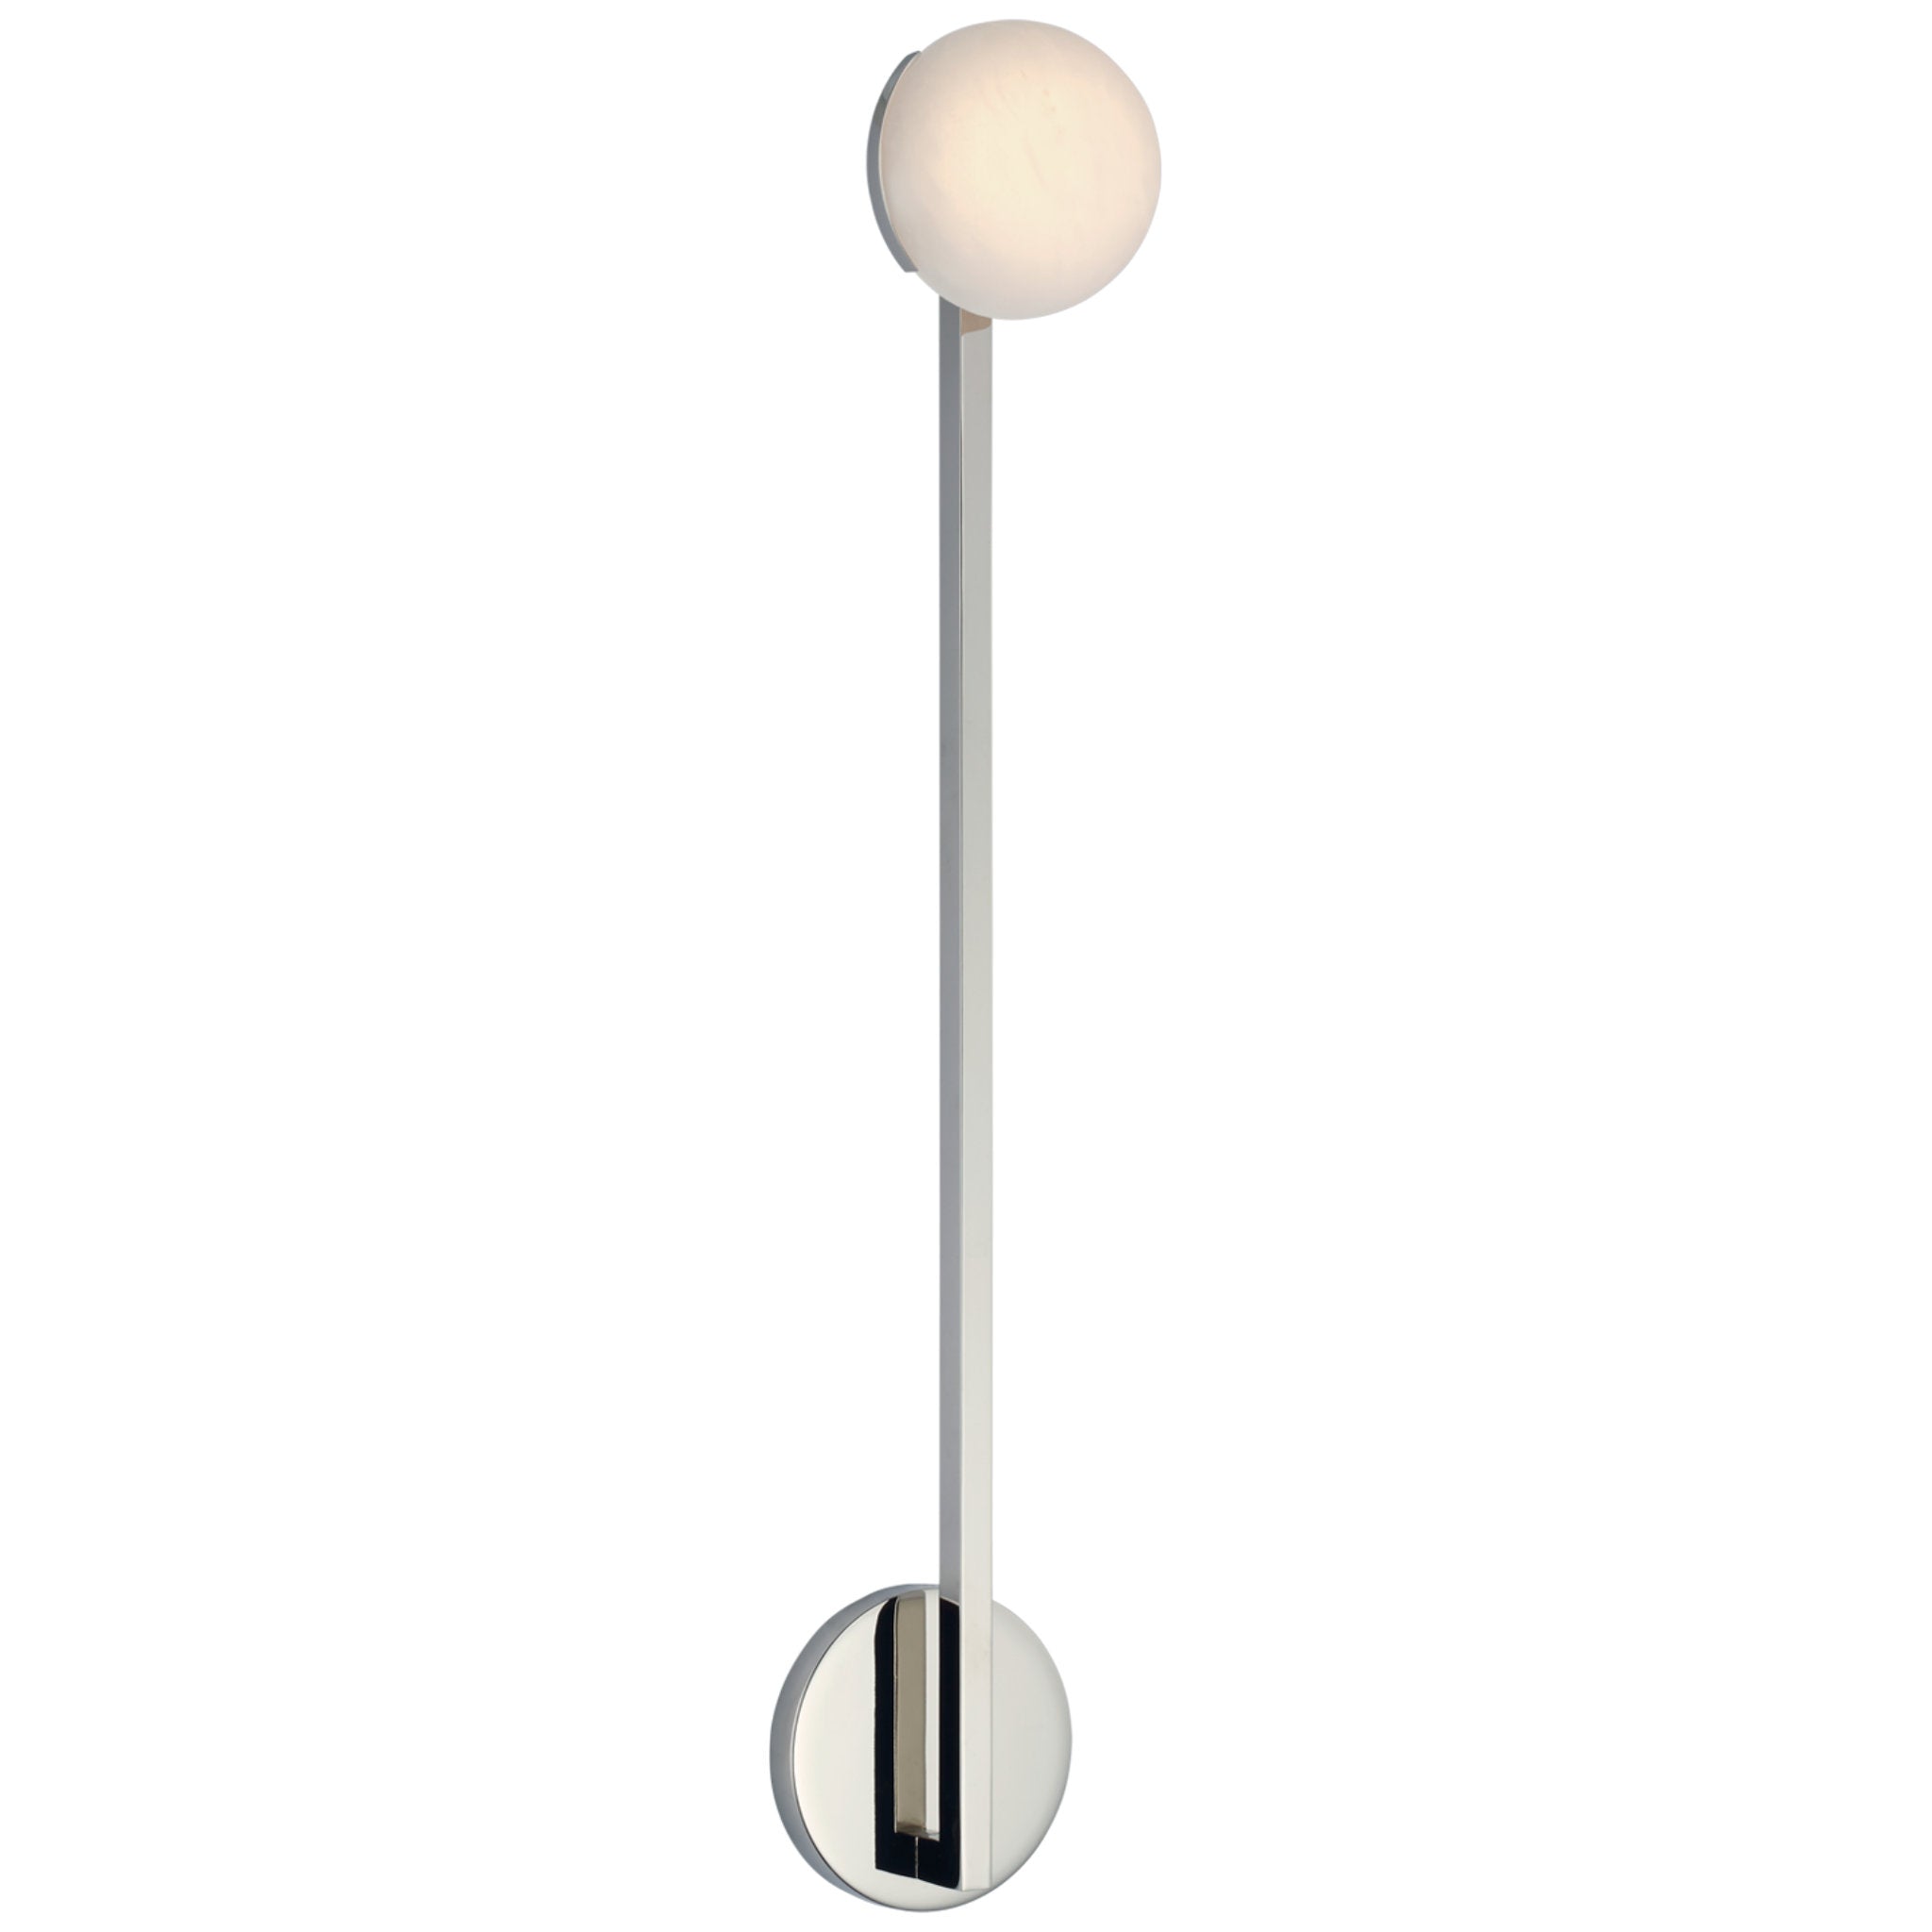 Kelly Wearstler Pedra 26" Single Sconce in Polished Nickel with Alabaster